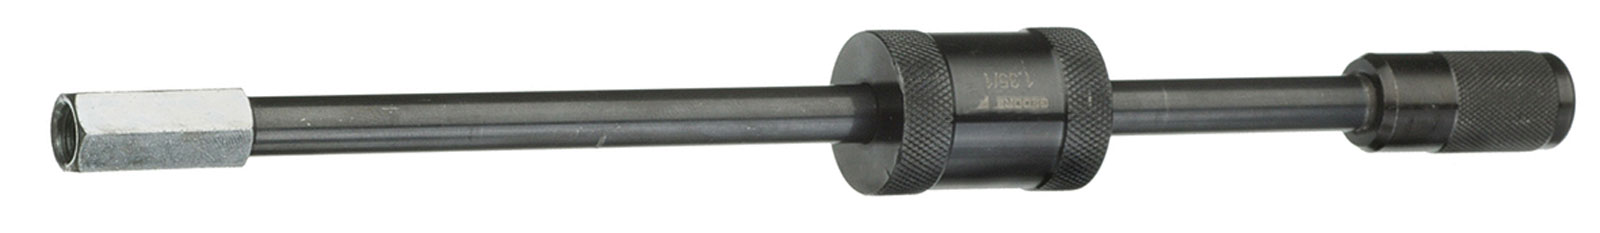 Picture of 1.35/1 Gleithammer 230 mm, 200 g